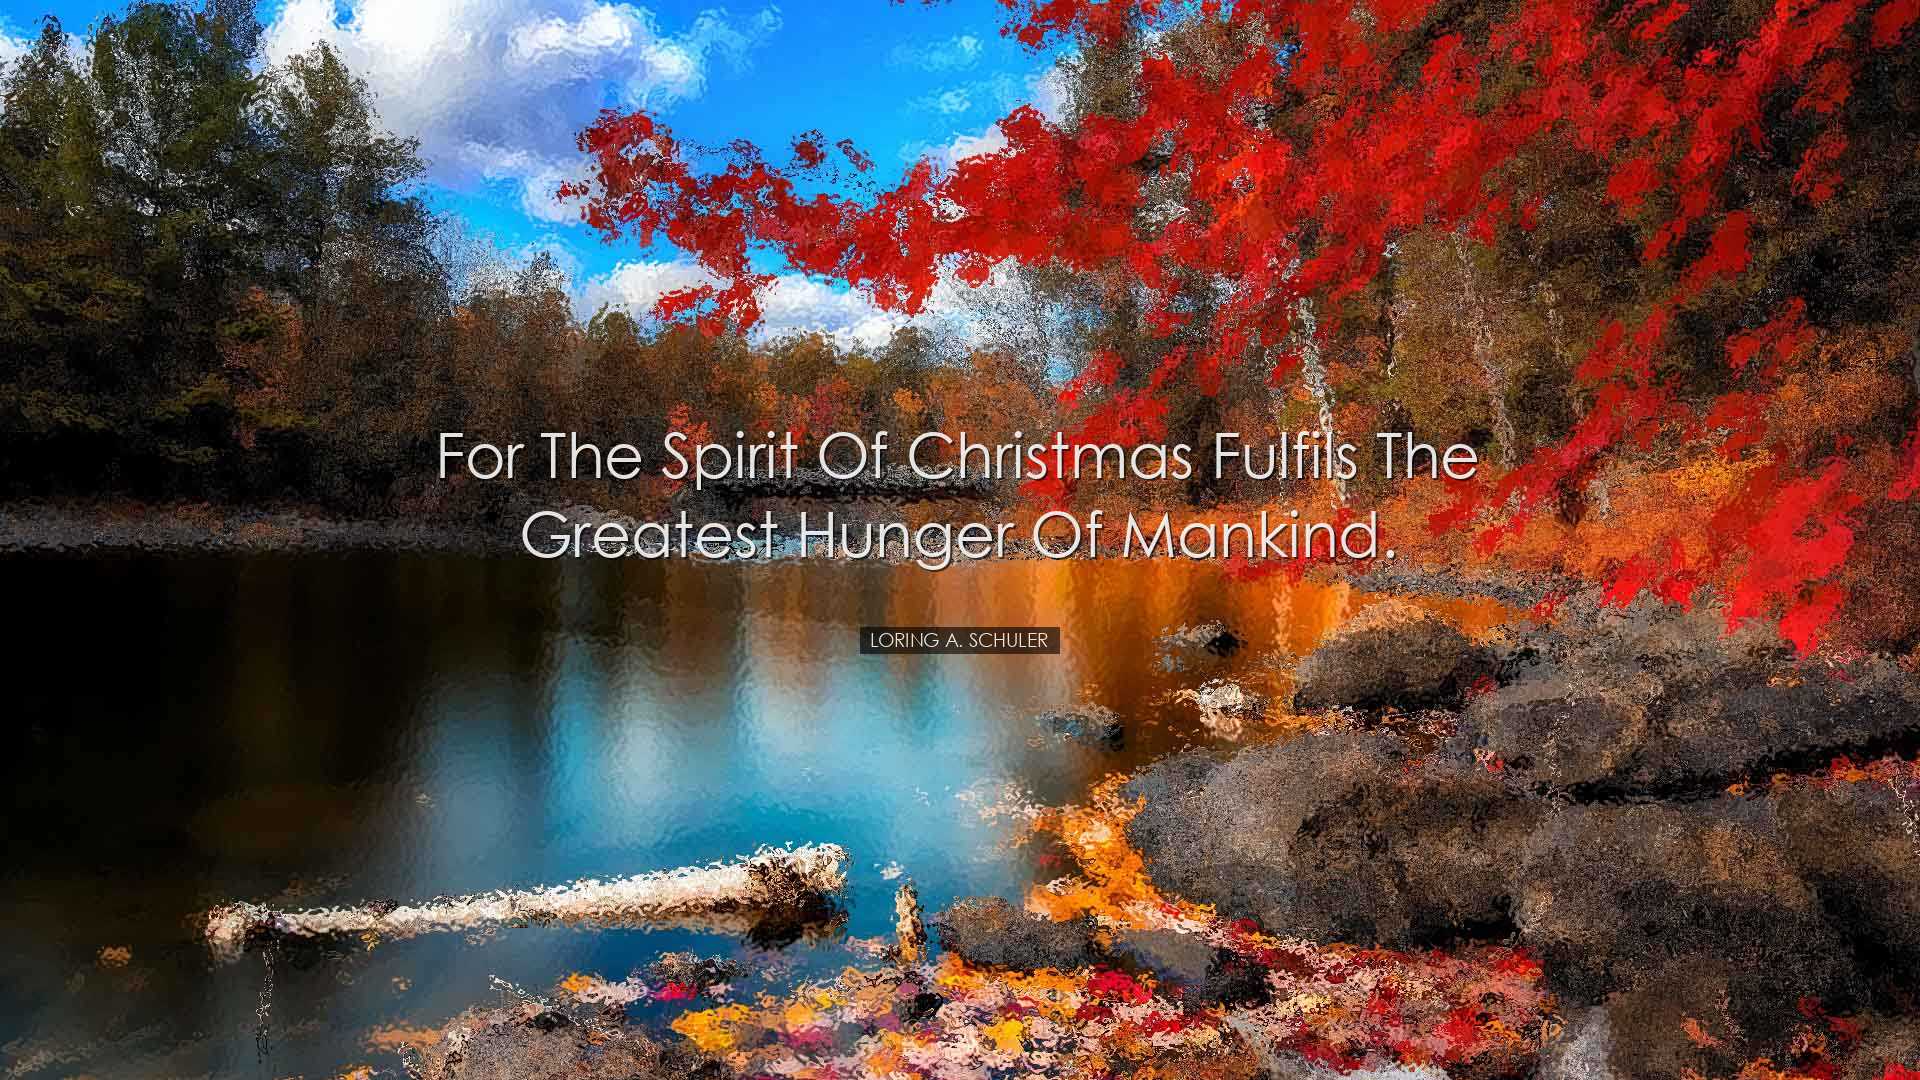 For the spirit of Christmas fulfils the greatest hunger of mankind